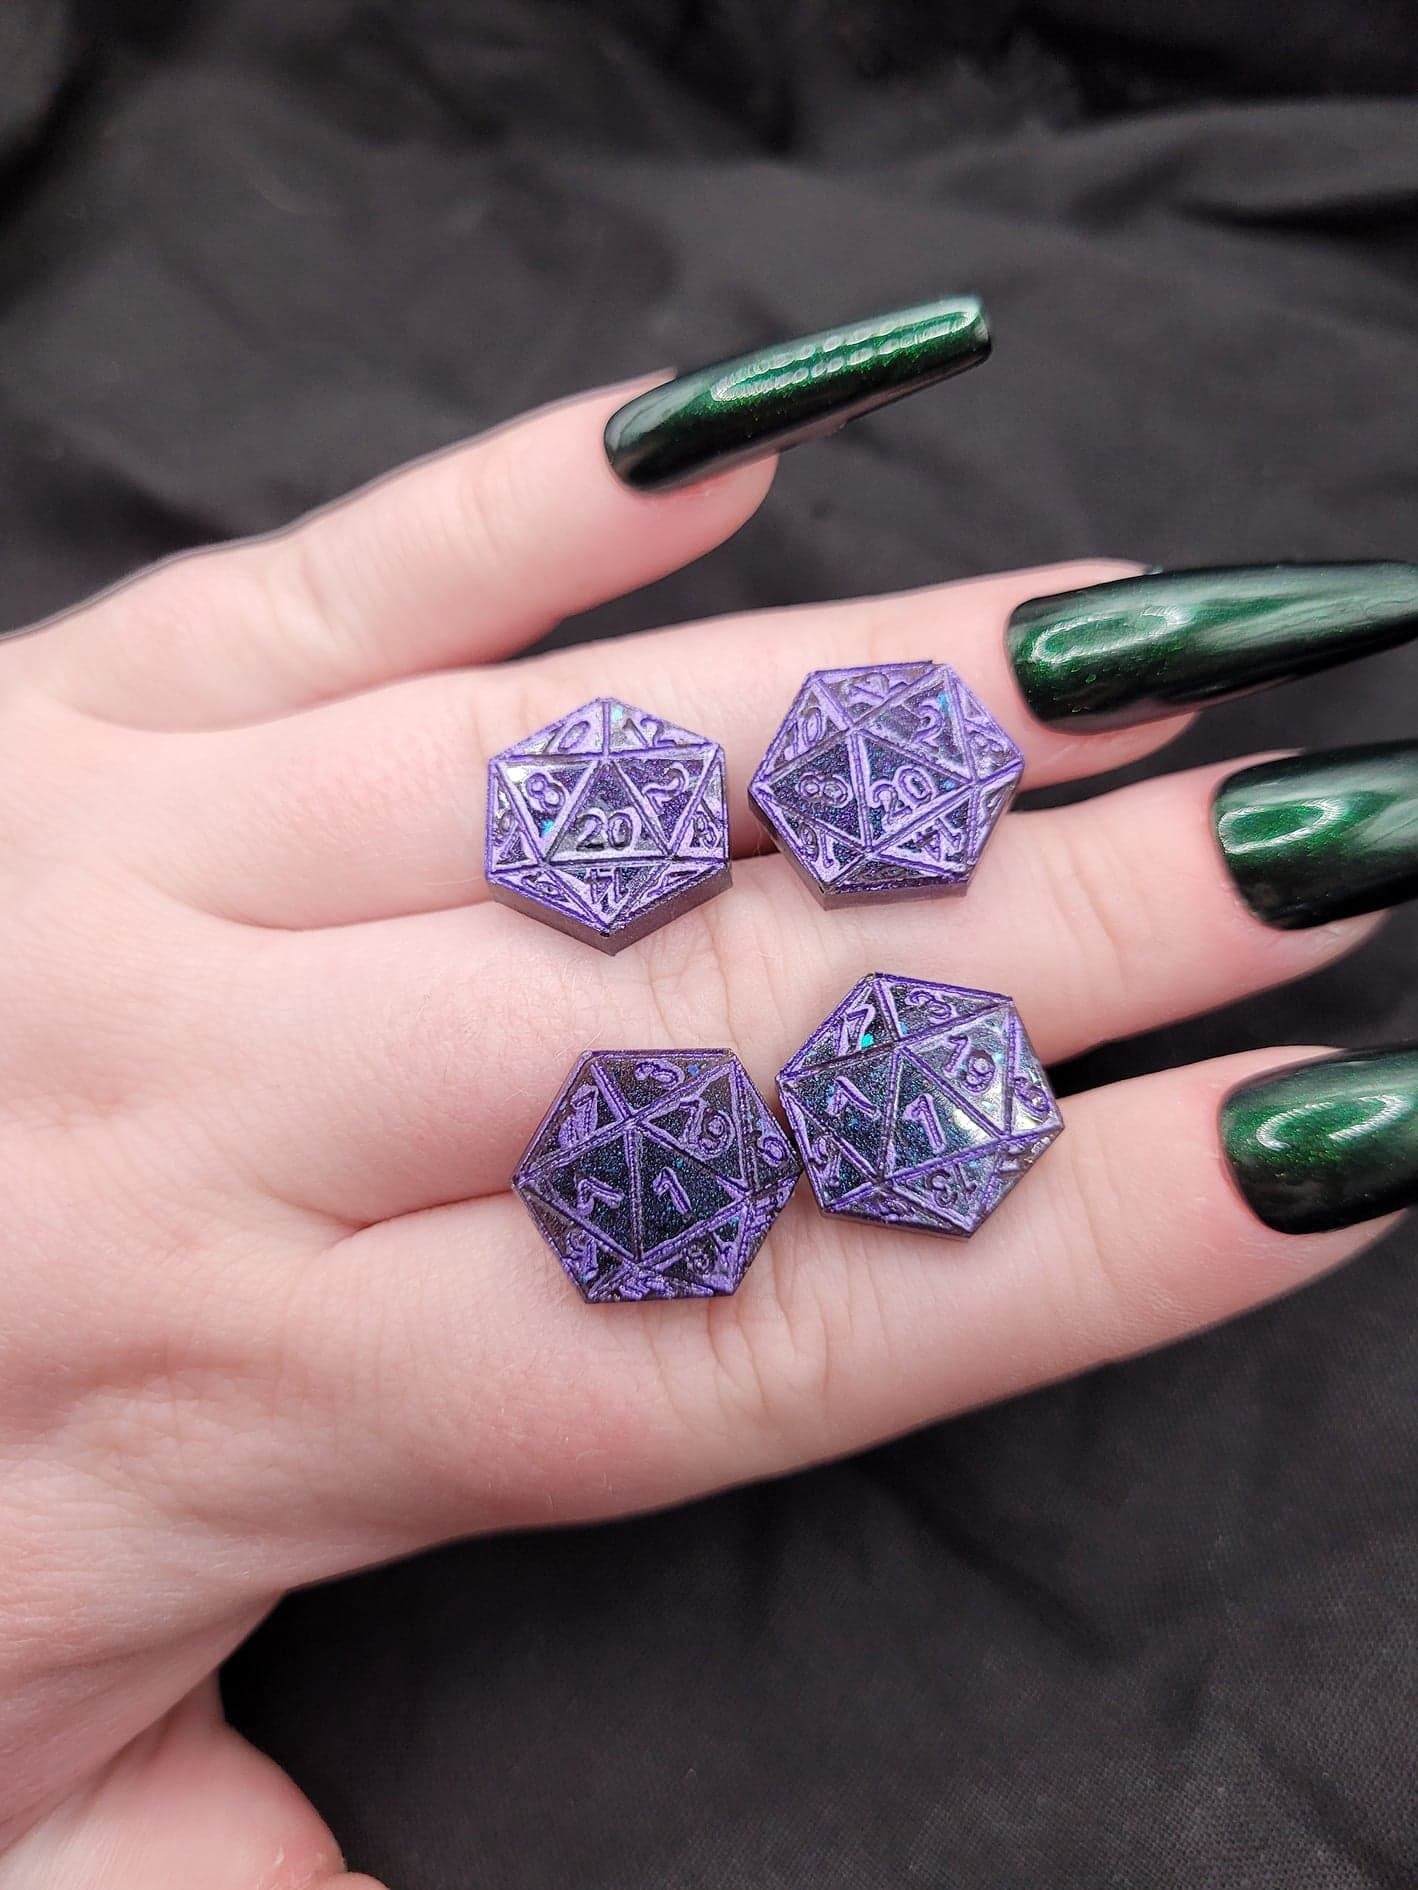 Purple and Blue Nerdy Sparkly DnD Dungeons and Dragons Multichrome Fantasy Dice Stud Resin Earrings